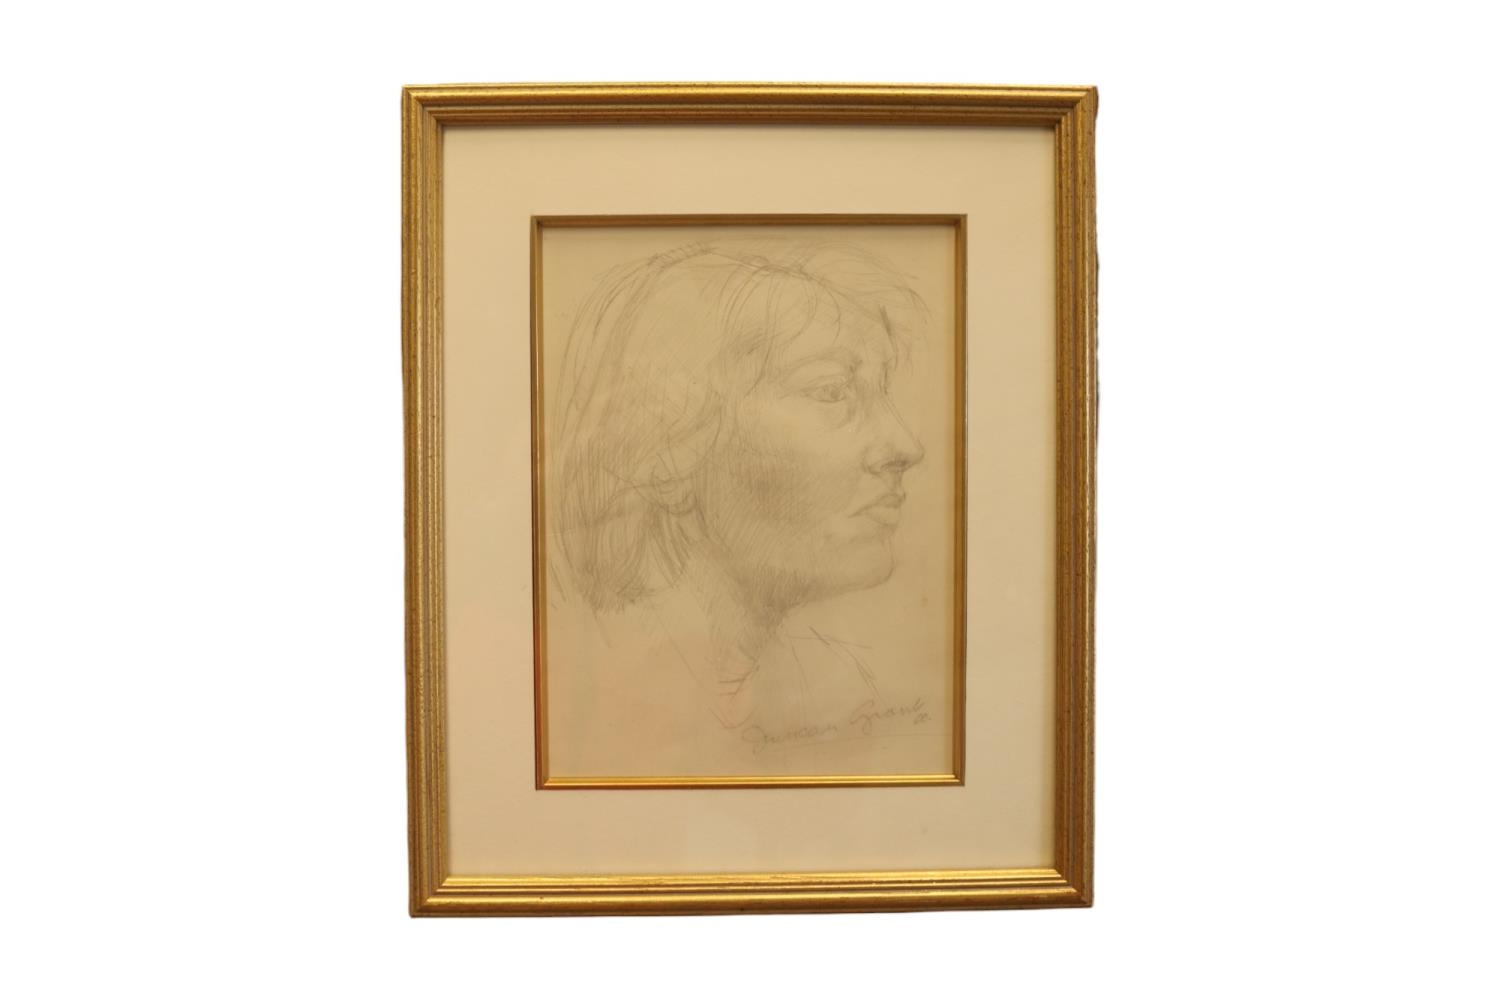 Duncan Grant (Scottish, 1885-1978). Pencil sketch portrait of an unknown lady sitter signed and